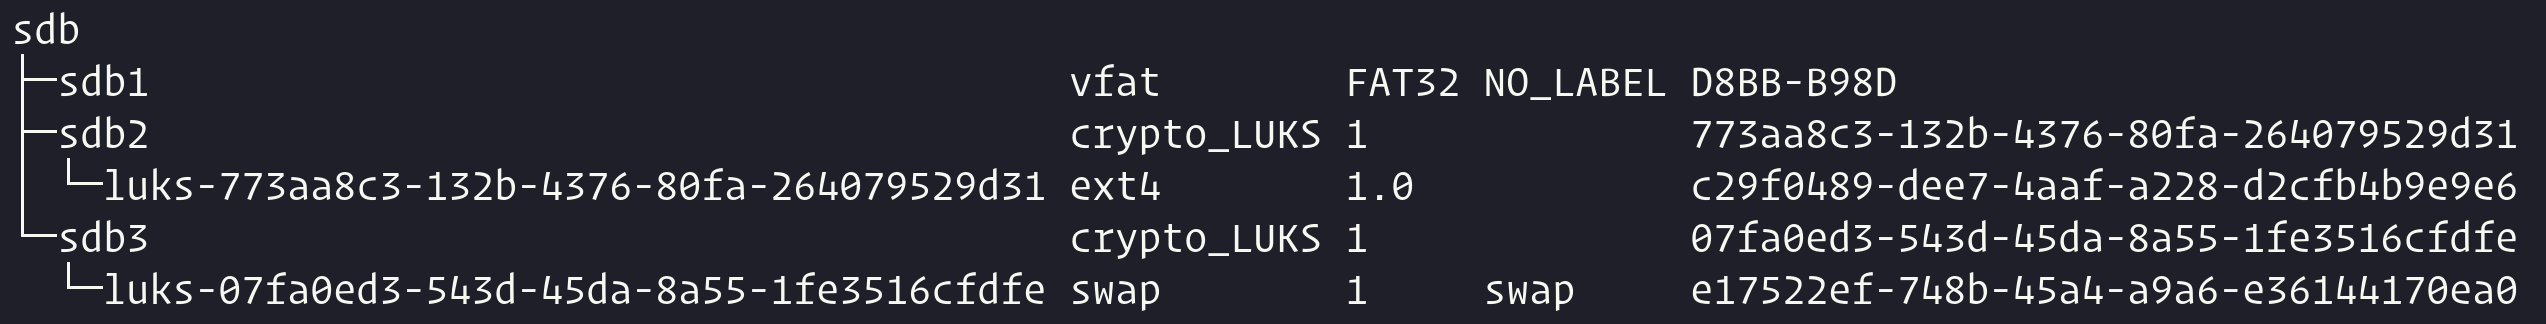 Output of the lsblk -f command, including a list of three partitions. There are two partitions which are using the crypto_LUKS format. The first one is the main partitions that contains the key file. The second one is the swap partition that we want to decrypt to be able to resume from hibernation.